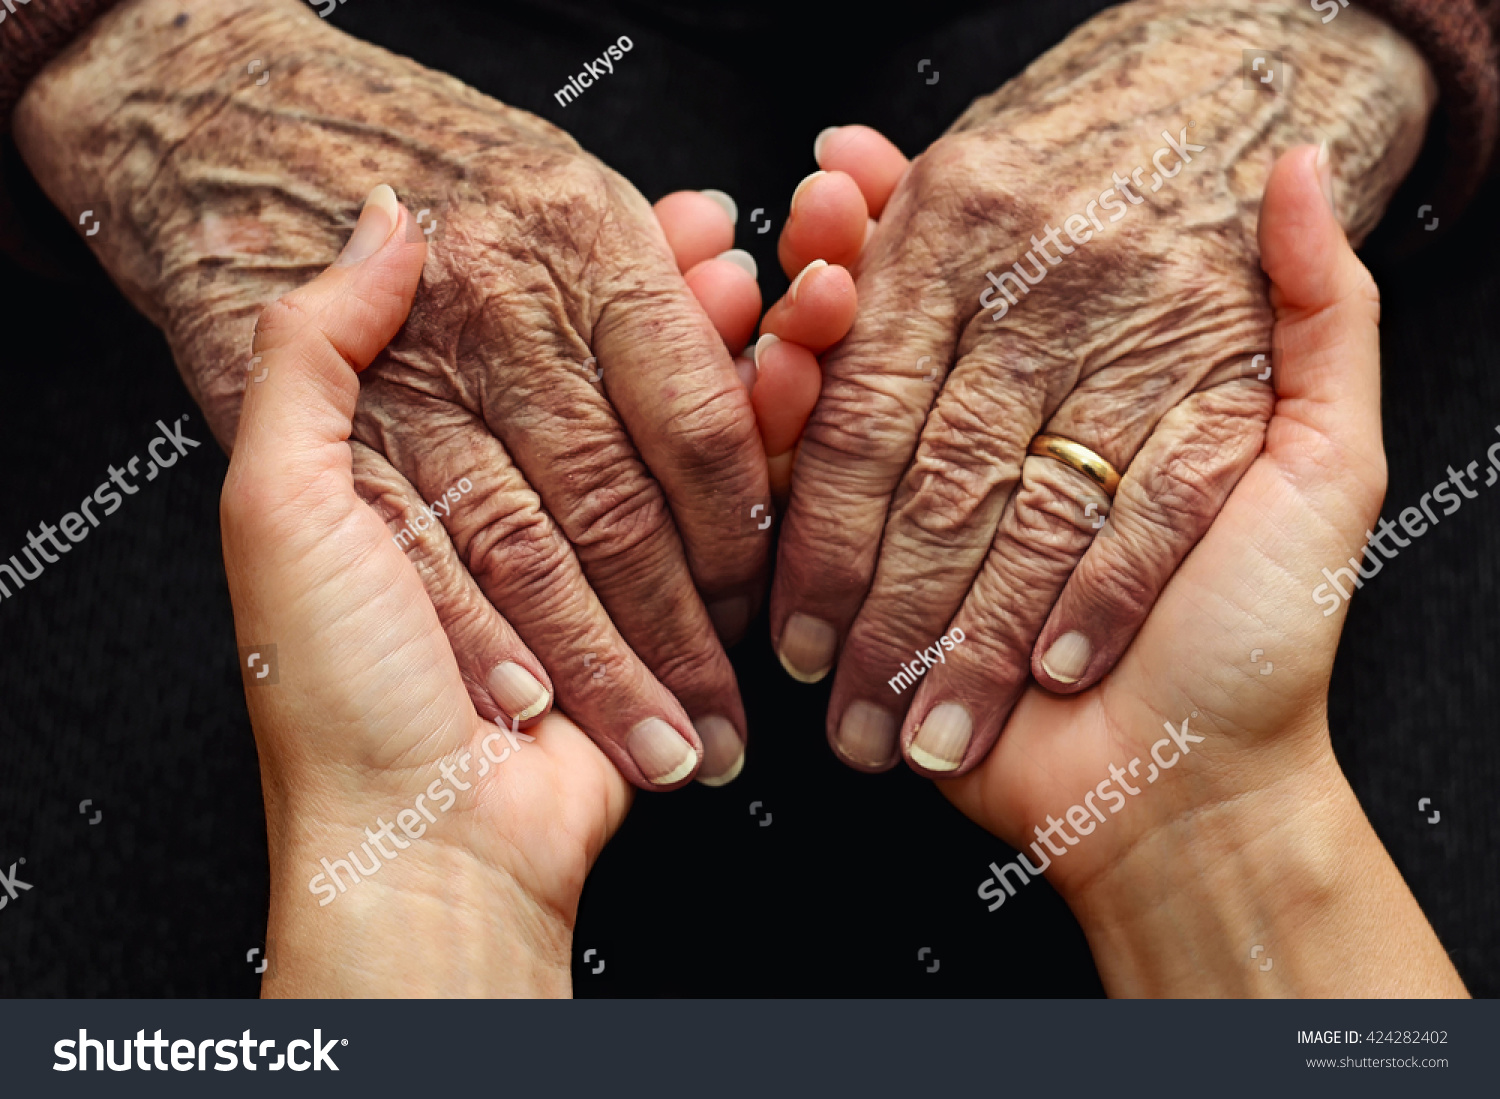 Support and care for the elderly #424282402